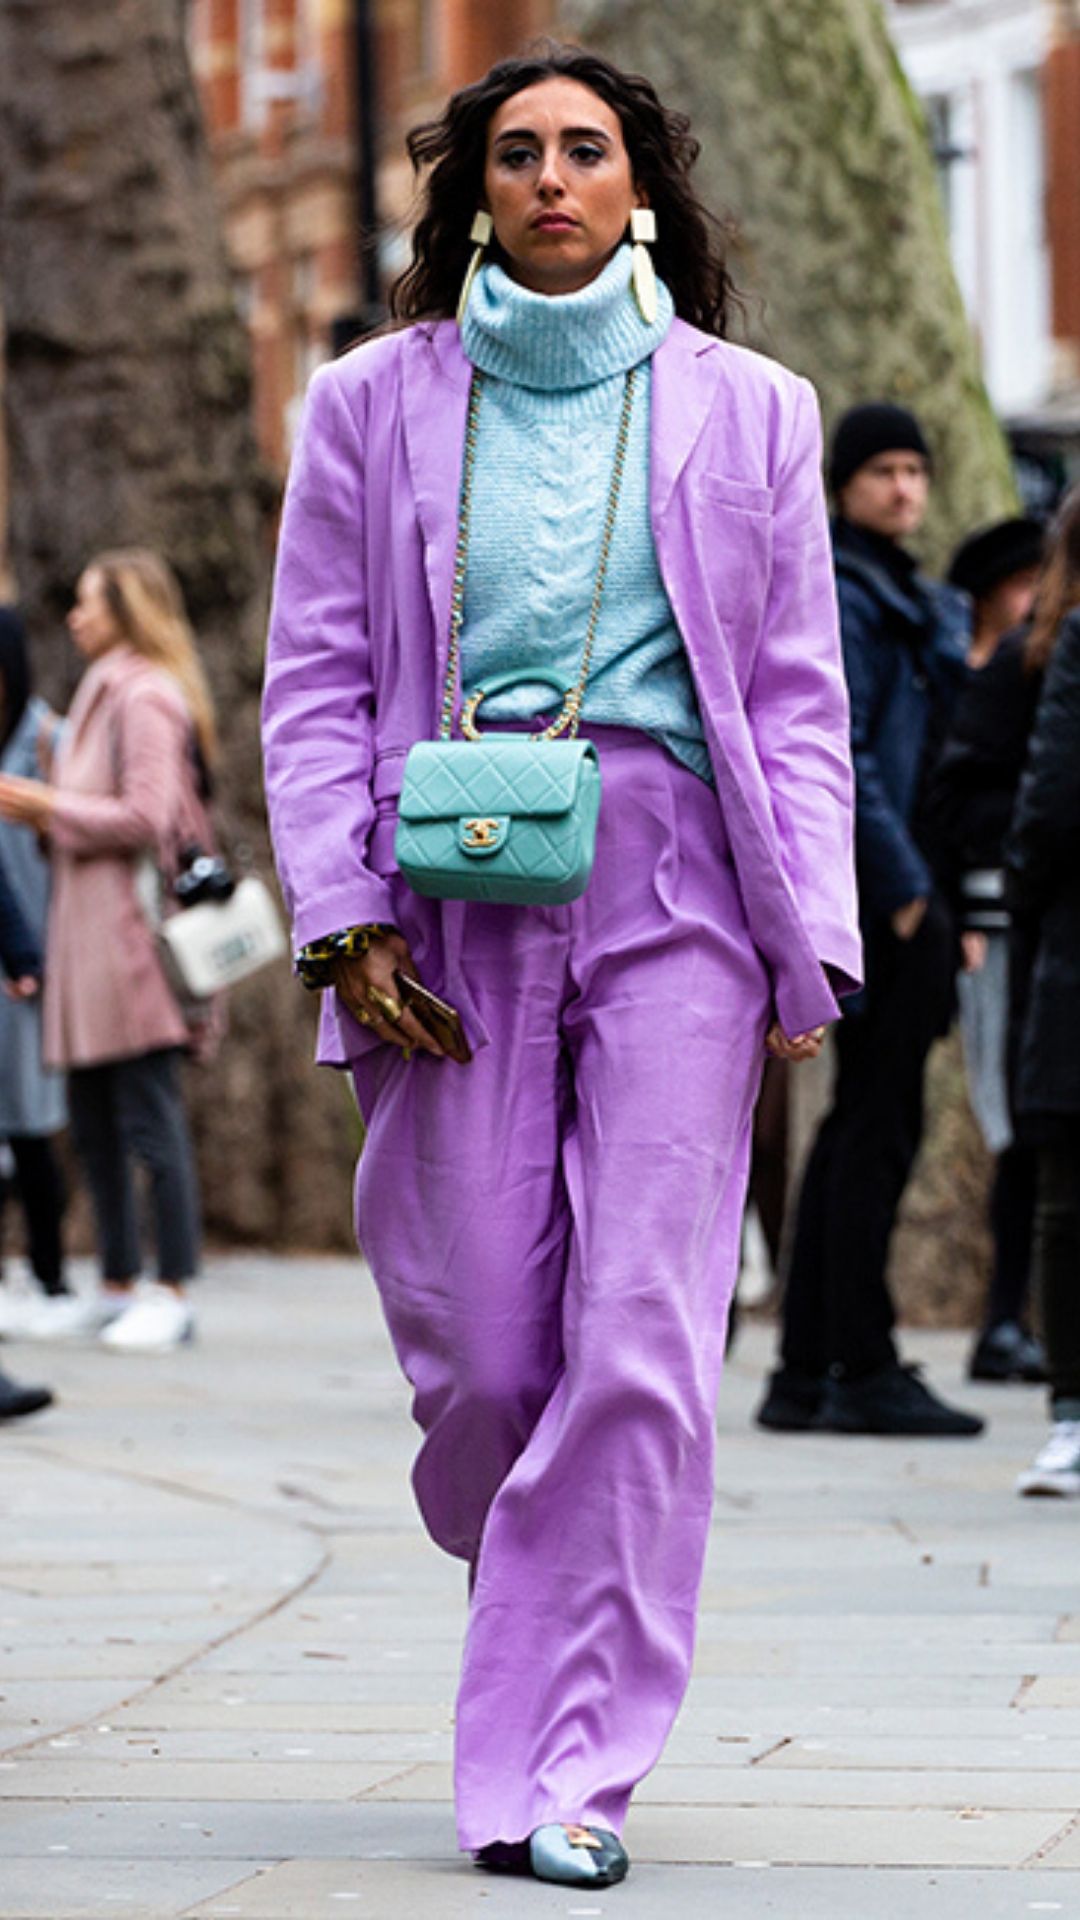 12 Impossibly Stylish Winter Street Style Looks From LFW | Harper's ...